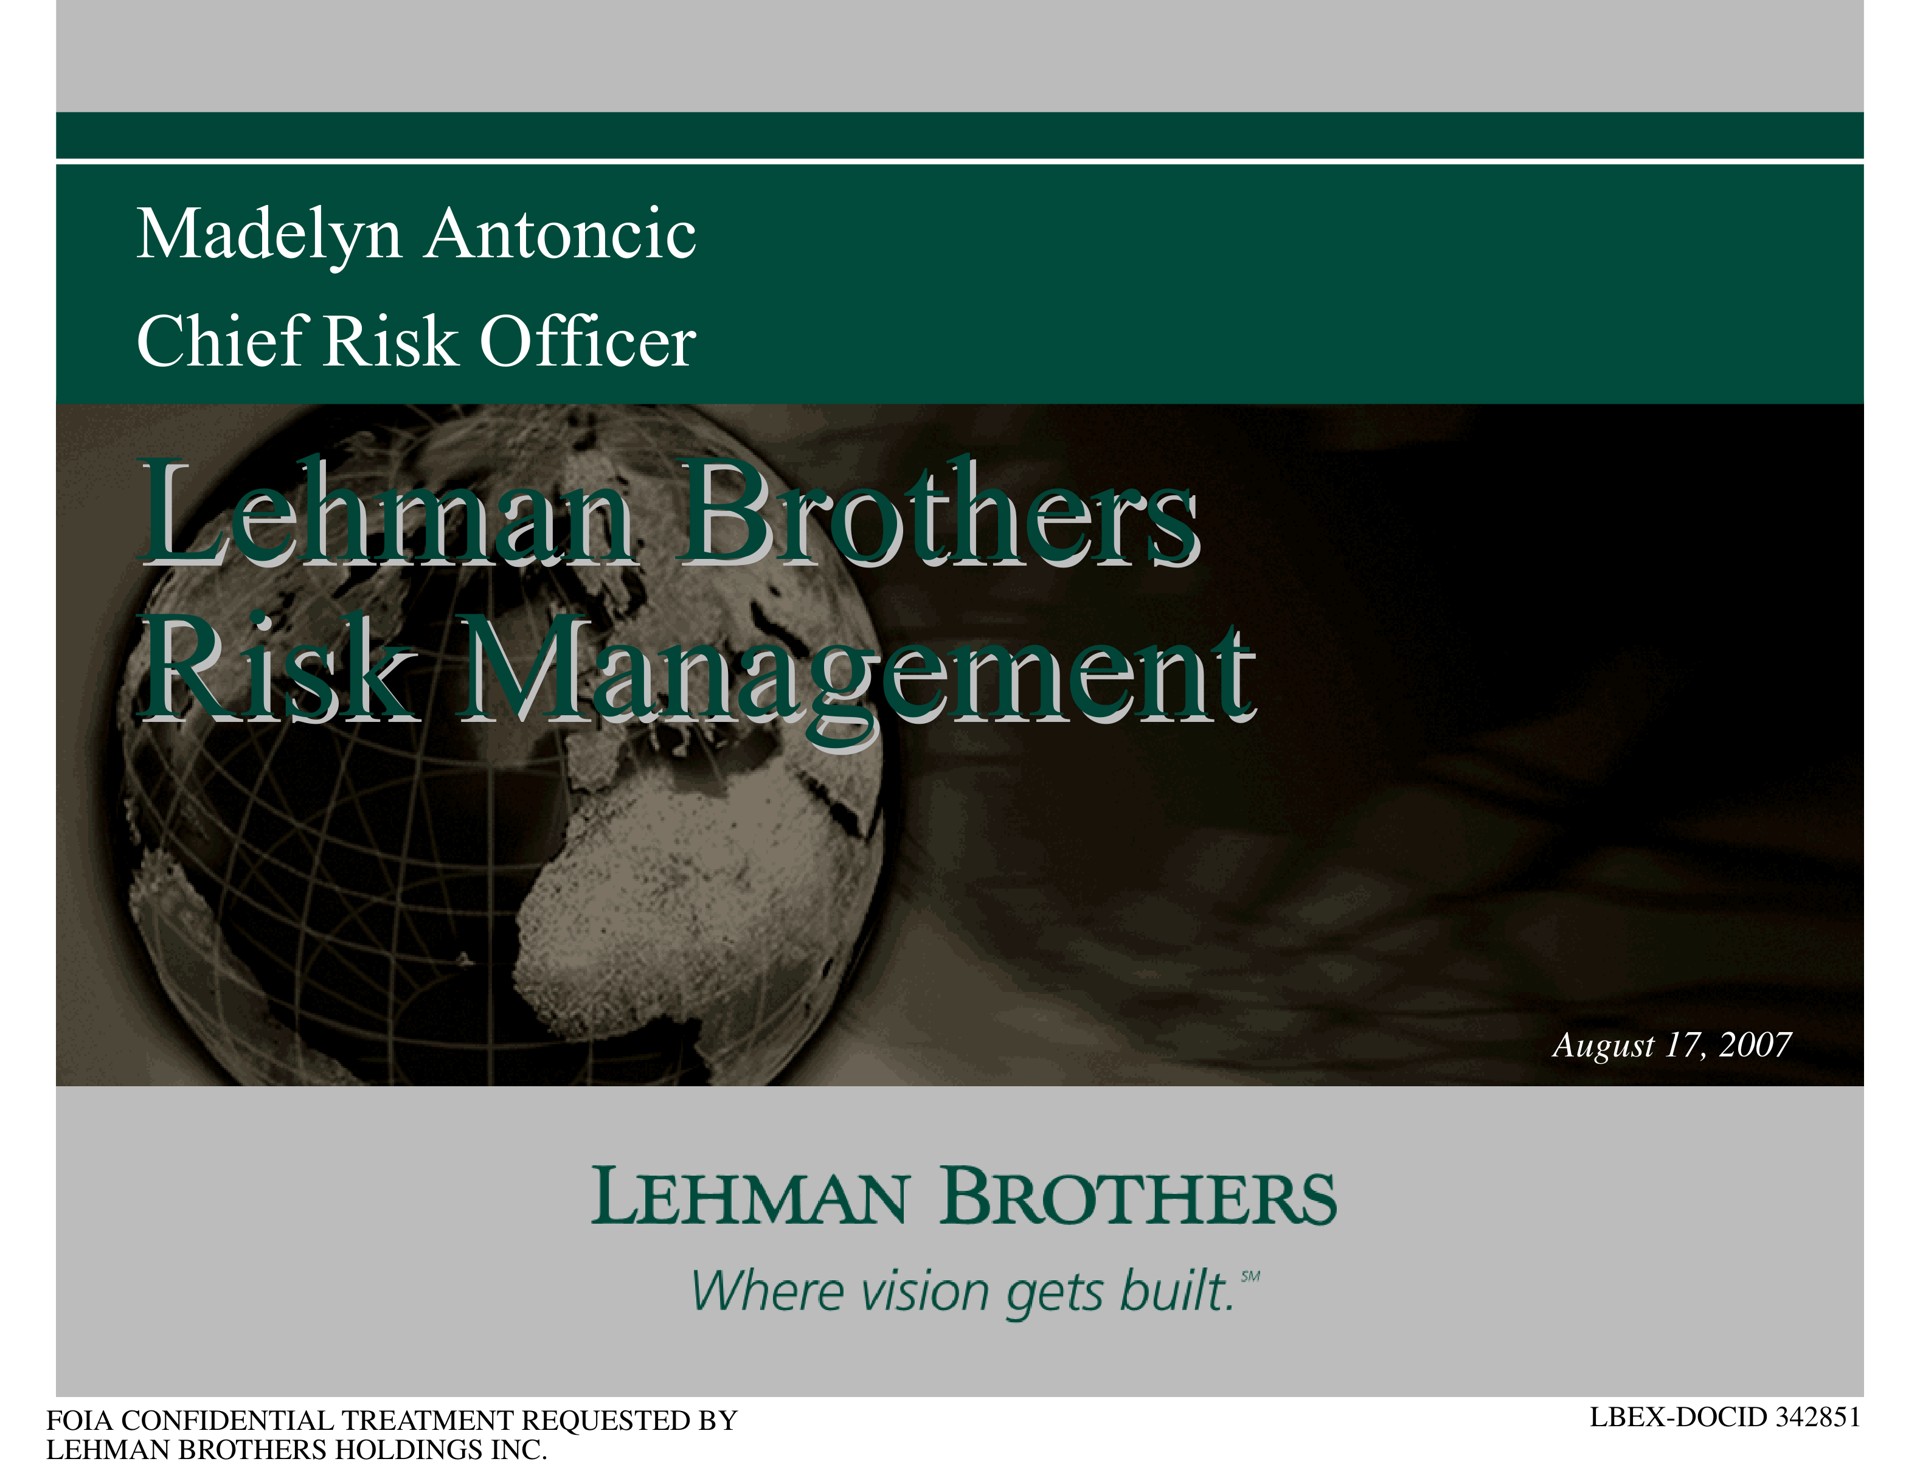 chief risk officer brothers brothers risk management risk management august | Lehman Brothers